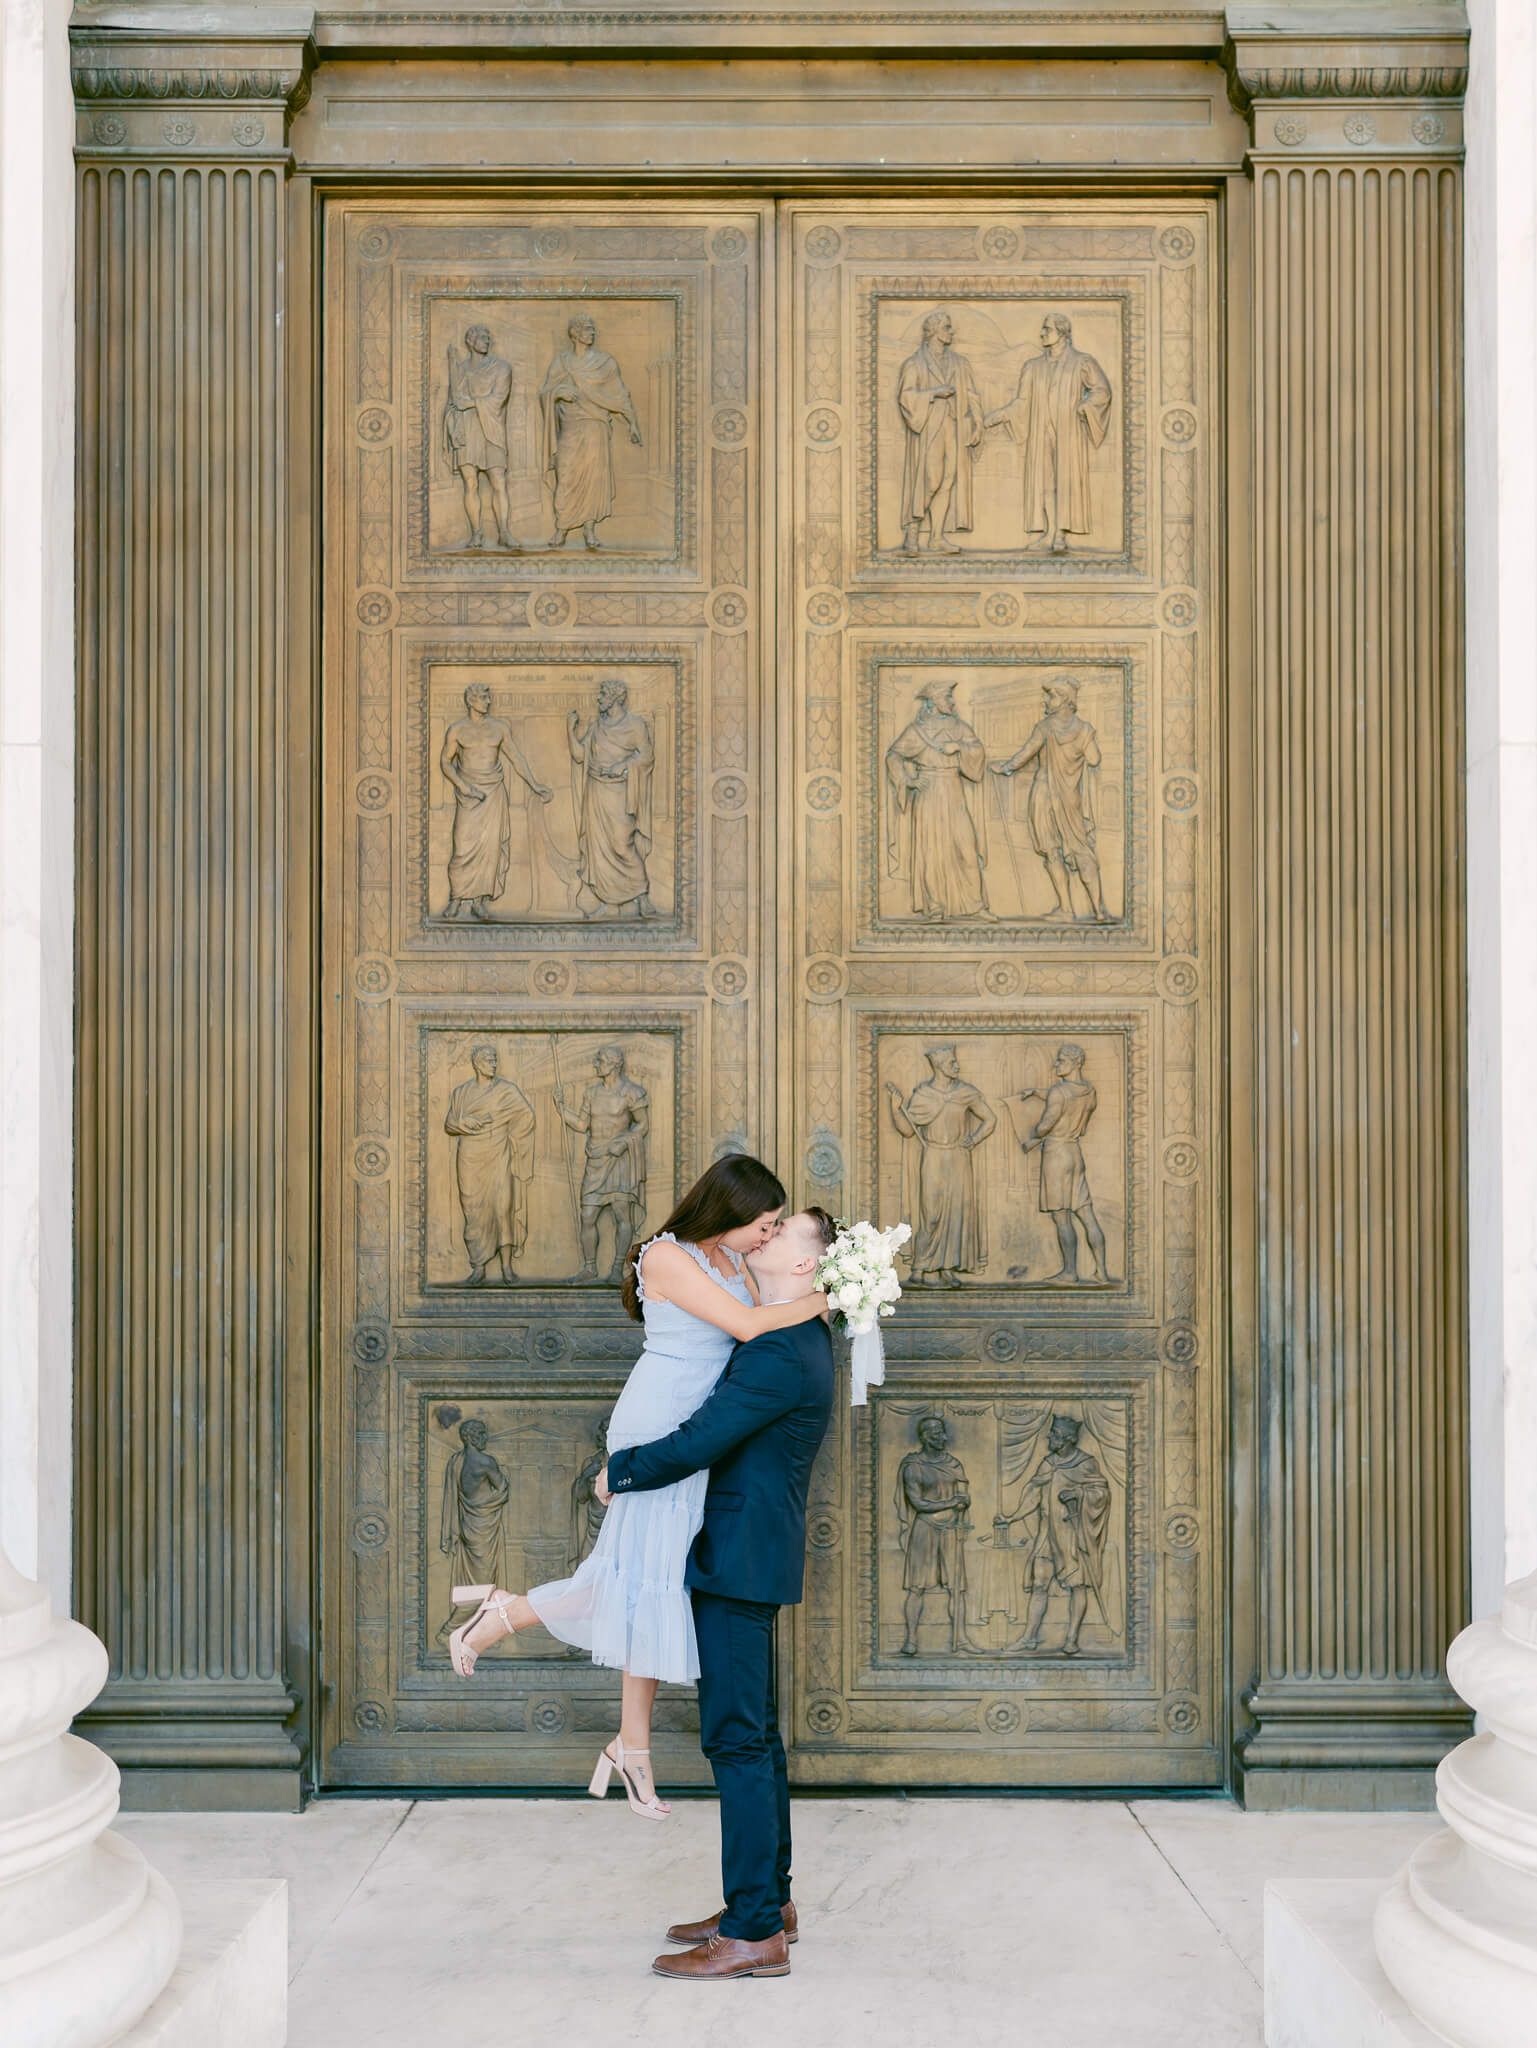 A man lifting his fiancée up and kissing her in front of the doors of the Supreme Court in Washington, D.C.